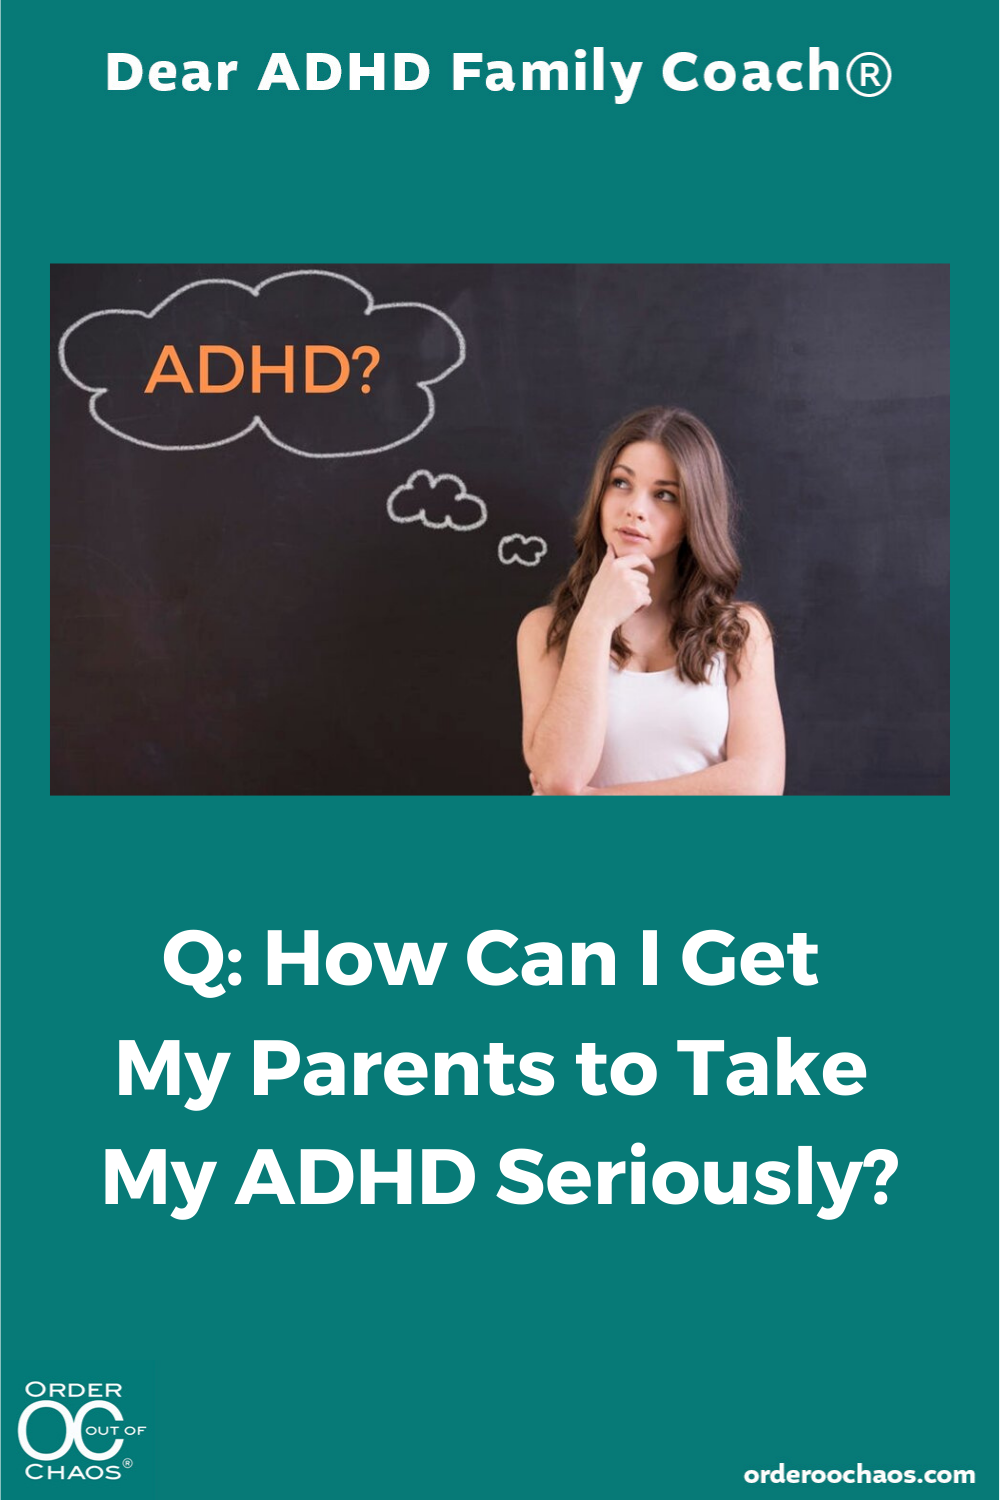 “Q: How Can I Get My Parents to Take ADHD Seriously?” — Order Out of Chaos